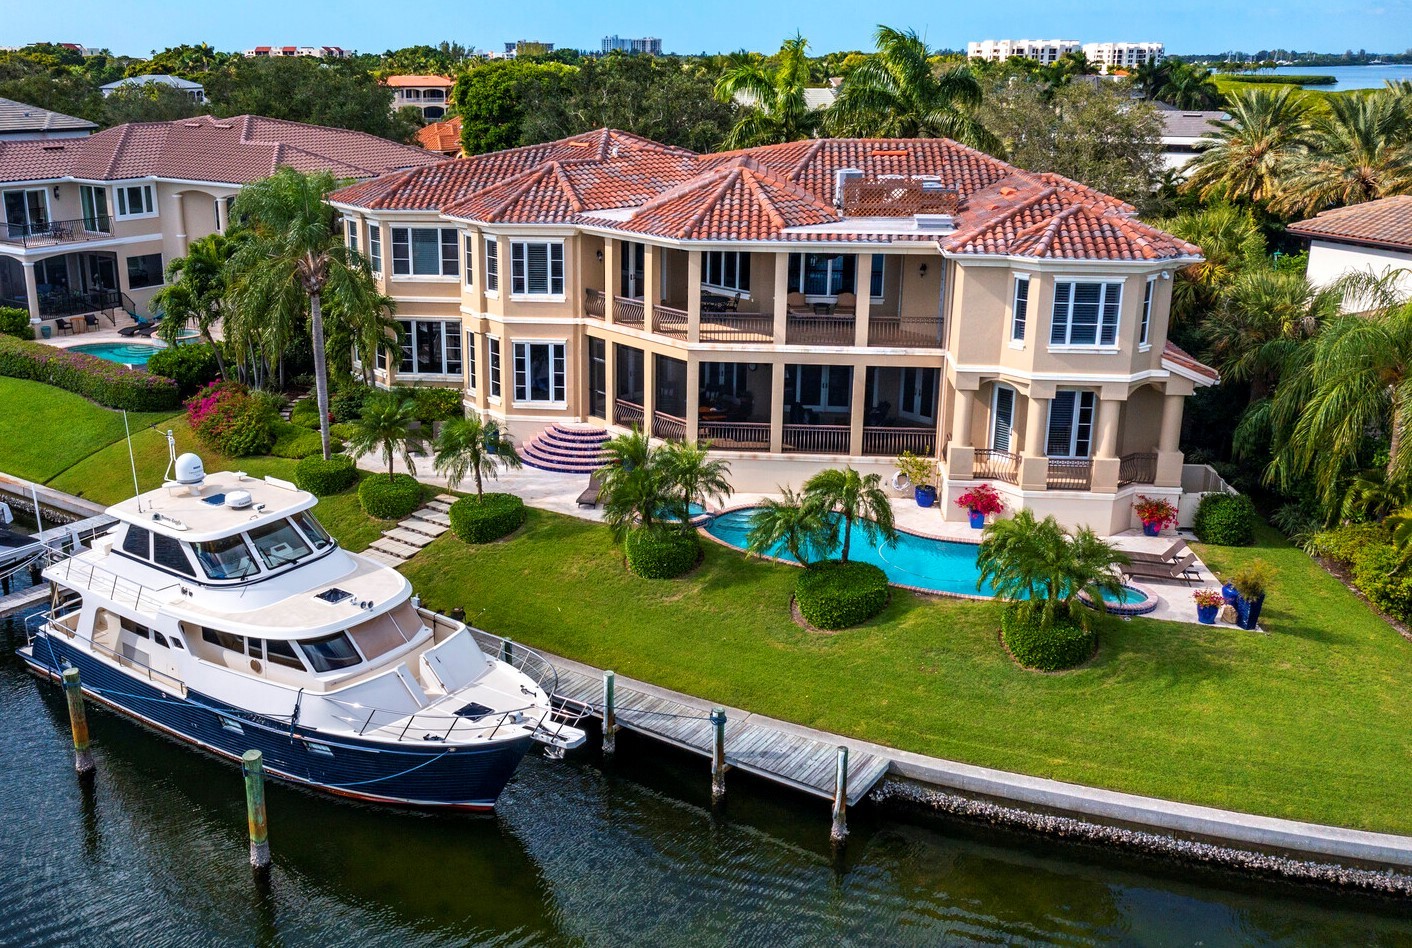 The home in Bay Isles Harbor sold for $10 million. (Courtesy photo).